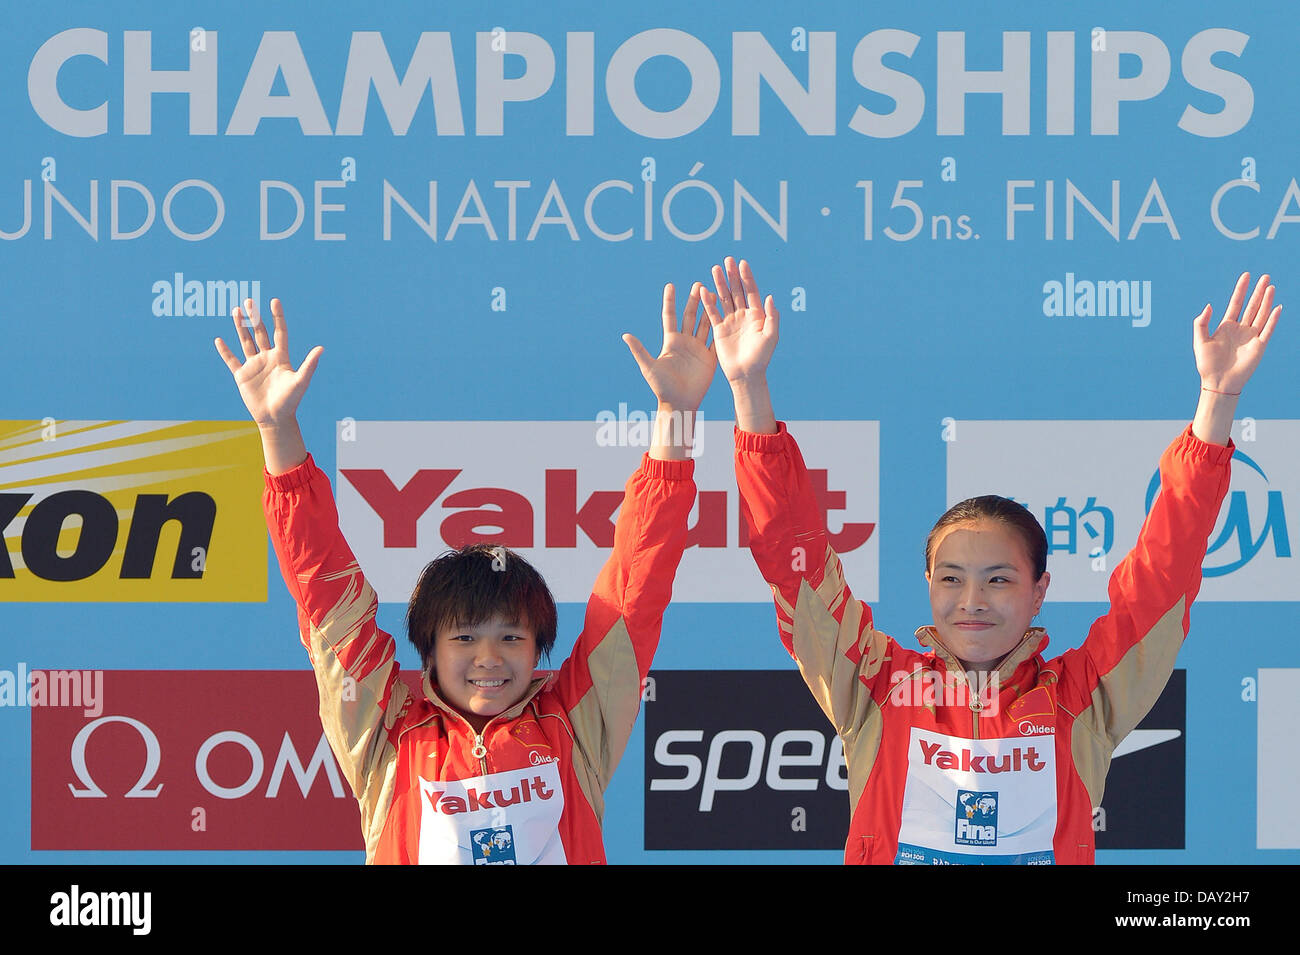 Barcelona, Spain. 20th July, 2013. Gold medalists Minxa Wu and Tingmao Shi of China celebrates on the podium after the women's 3m Synchro Springboard diving final of the 15th FINA Swimming World Championships at Montjuic Municipal Pool in Barcelona, Spain, 20 July 2013. Foto: David Ebener/dpa /dpa/Alamy Live News Stock Photo